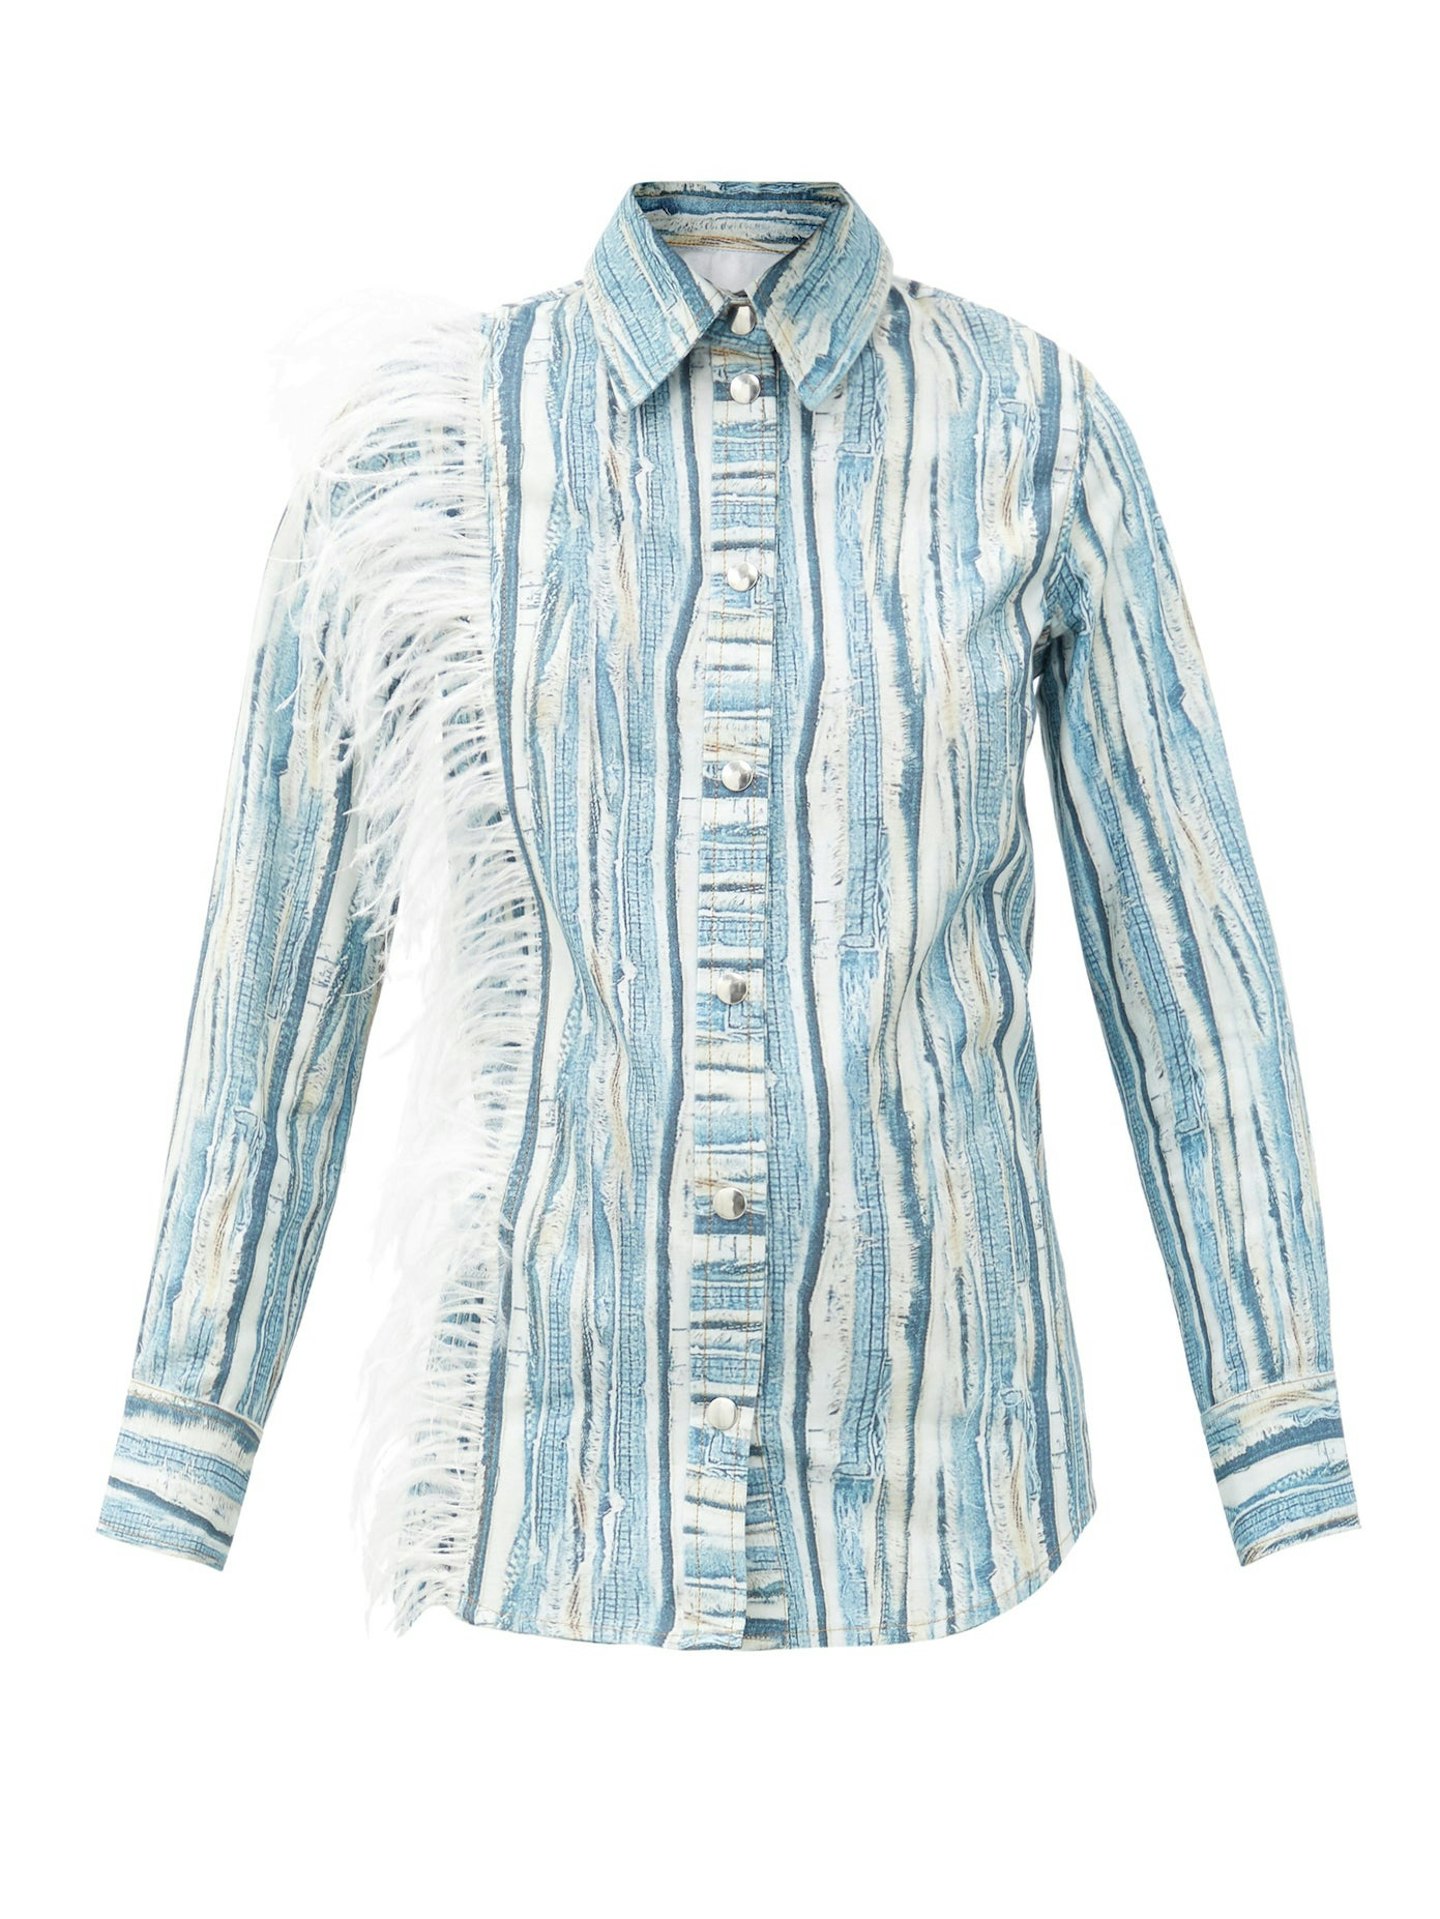 Thebe Magugu, Feather-Trimmed Shredded Denim-Print Cotton Shirt, WAS £590 NOW £295